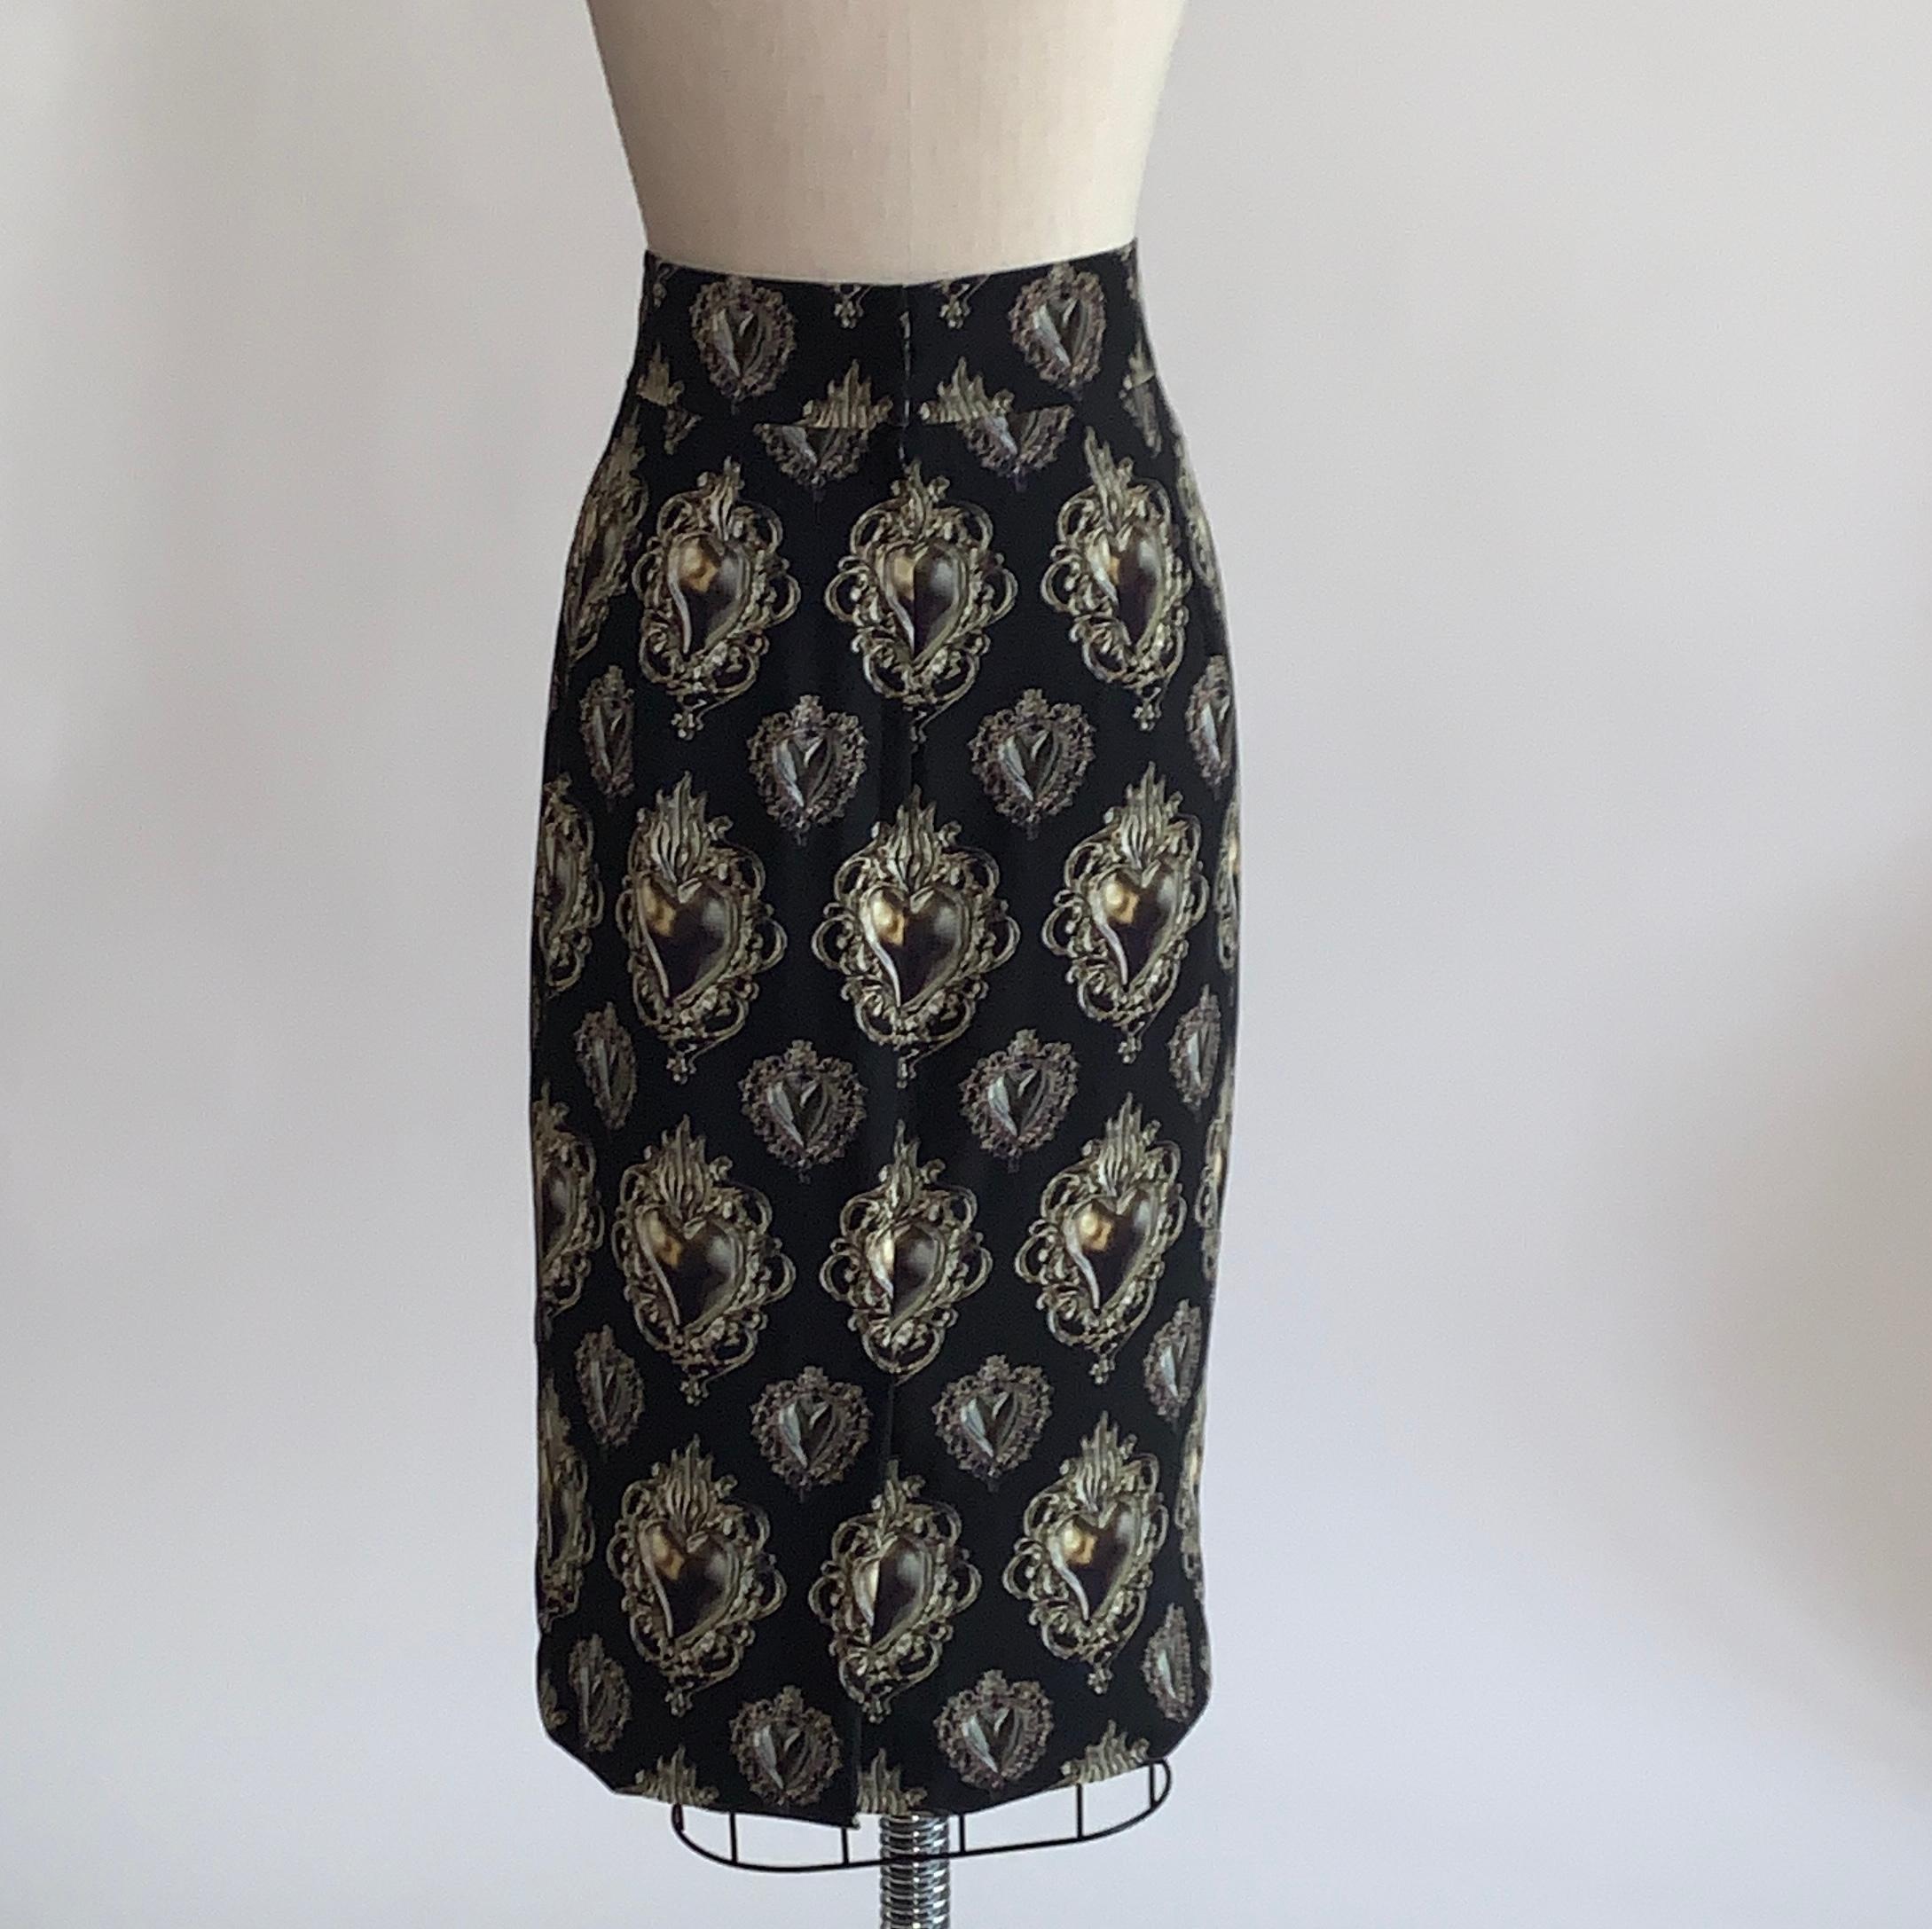 Women's New 2015 Dolce & Gabbana Sacred Heart Print Pencil Skirt in Black and Gold